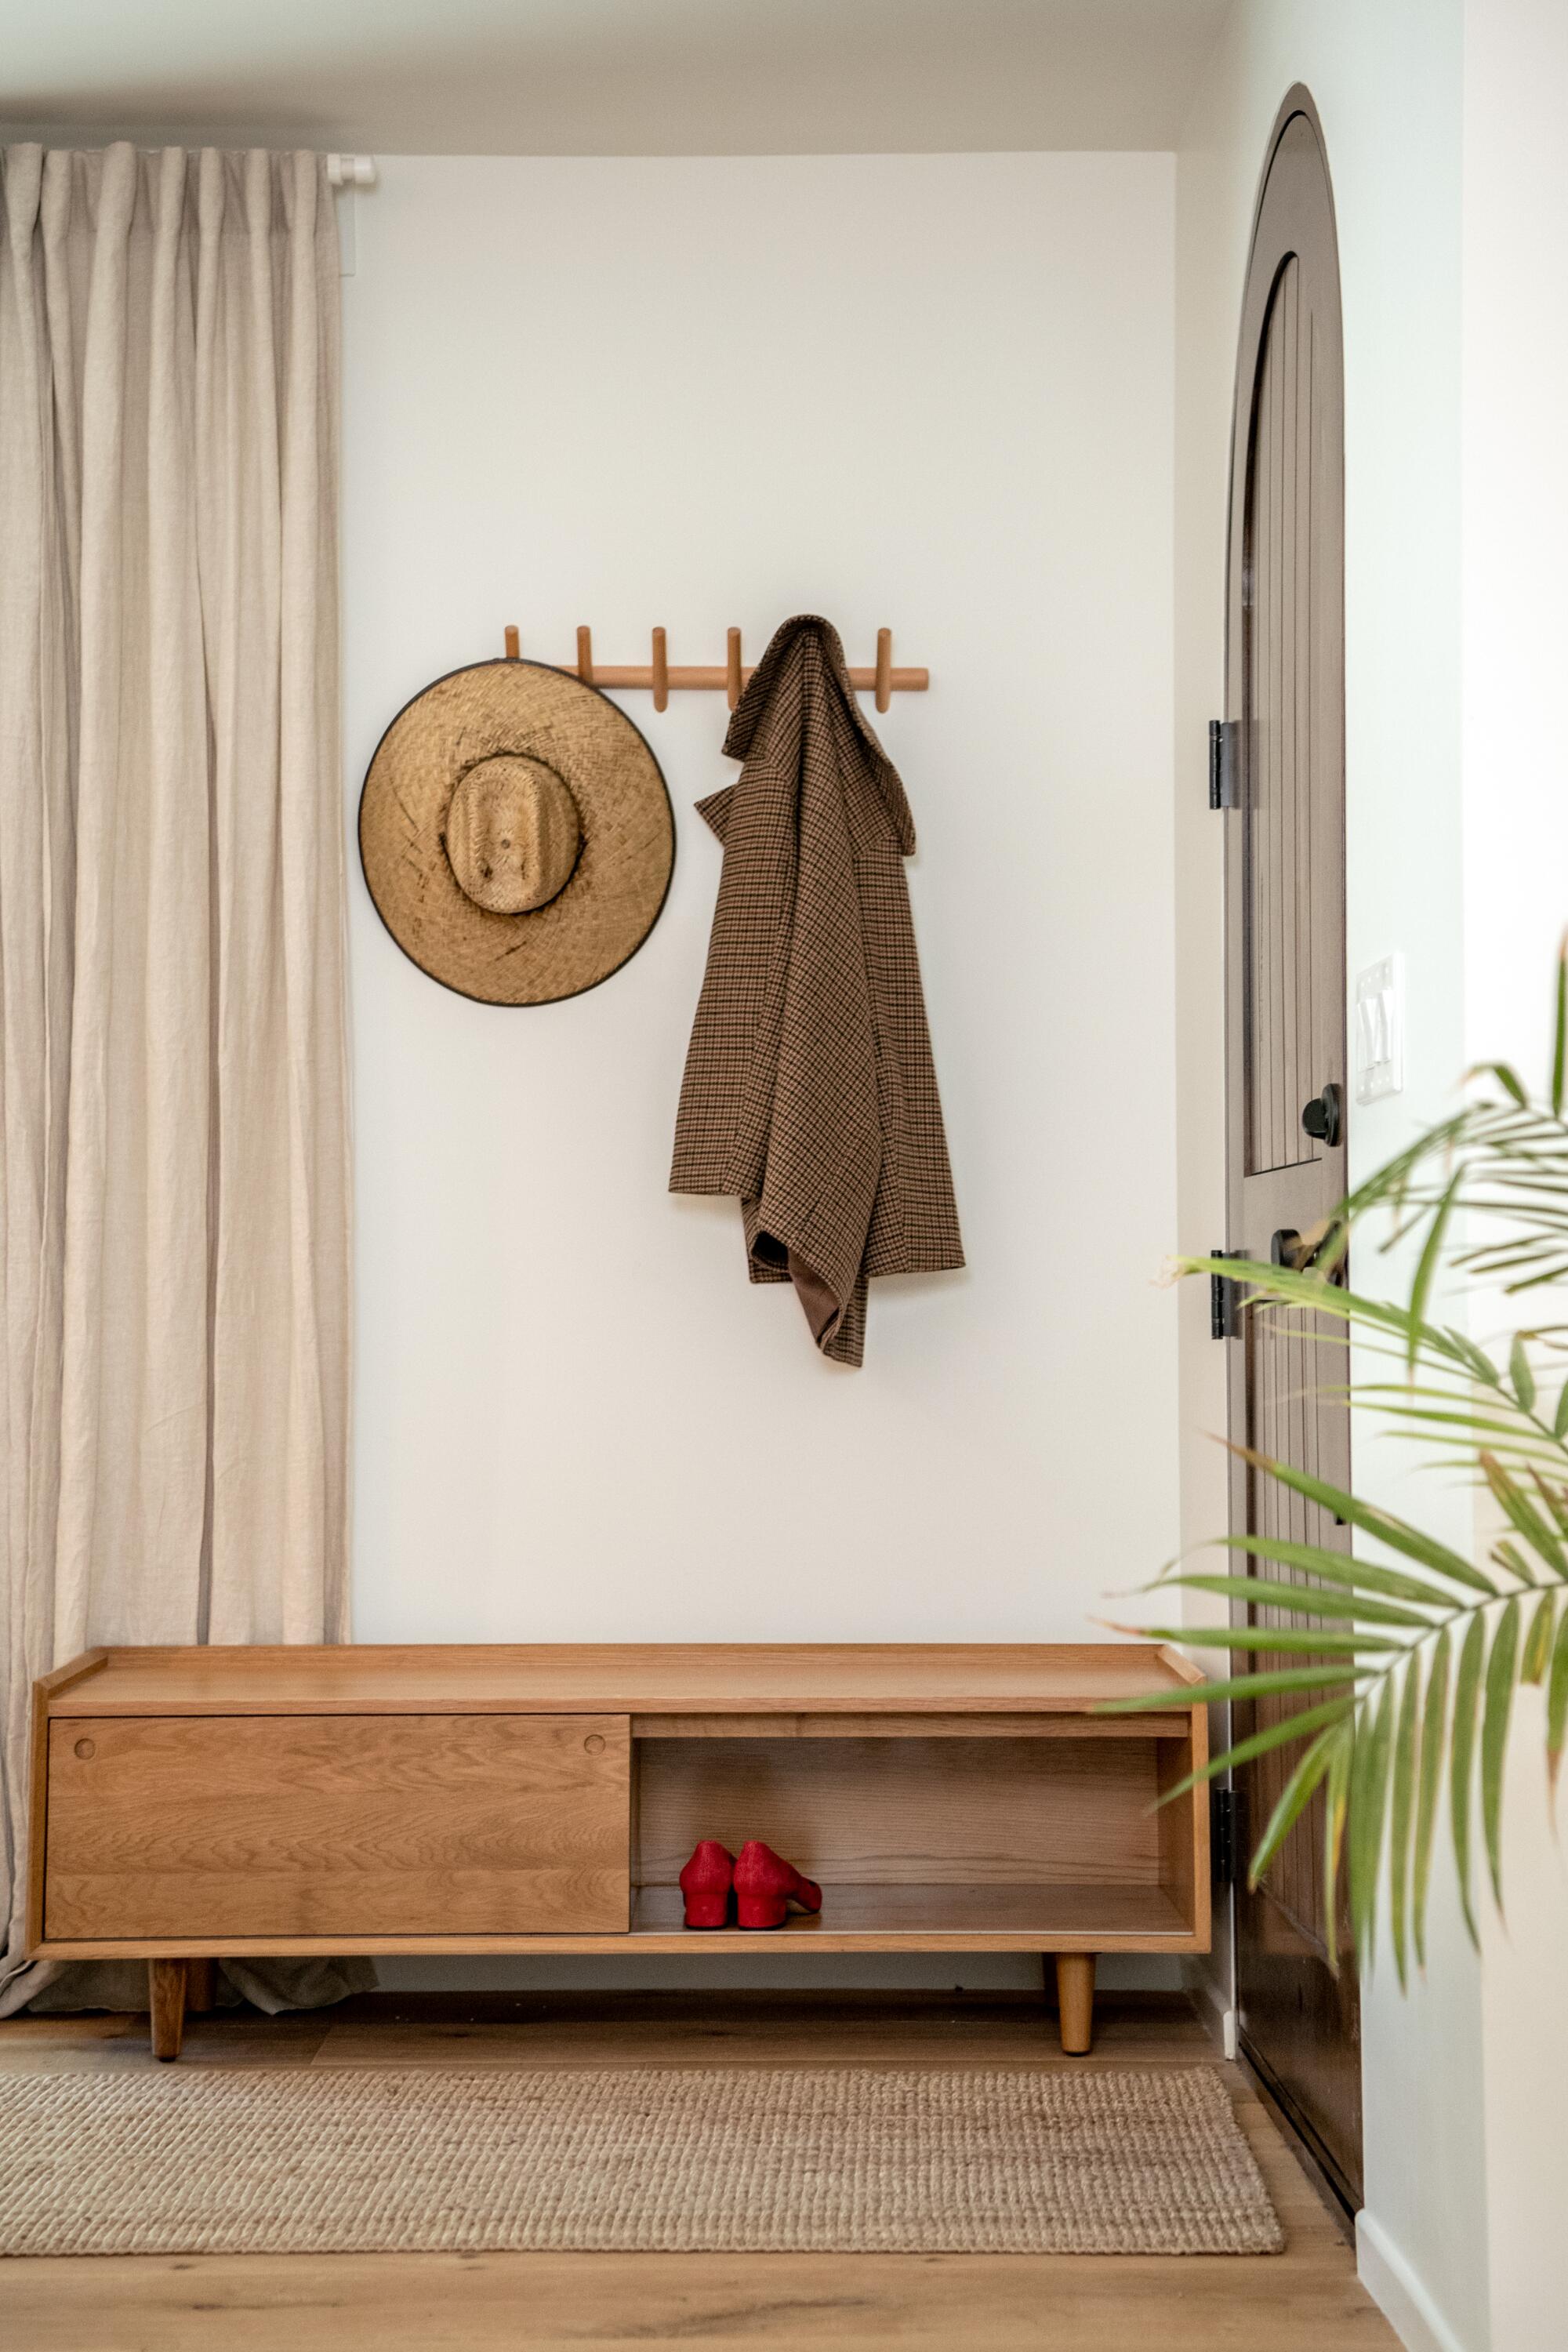 A hat and jacket hang on the wall in a tiny vestibule by a door.